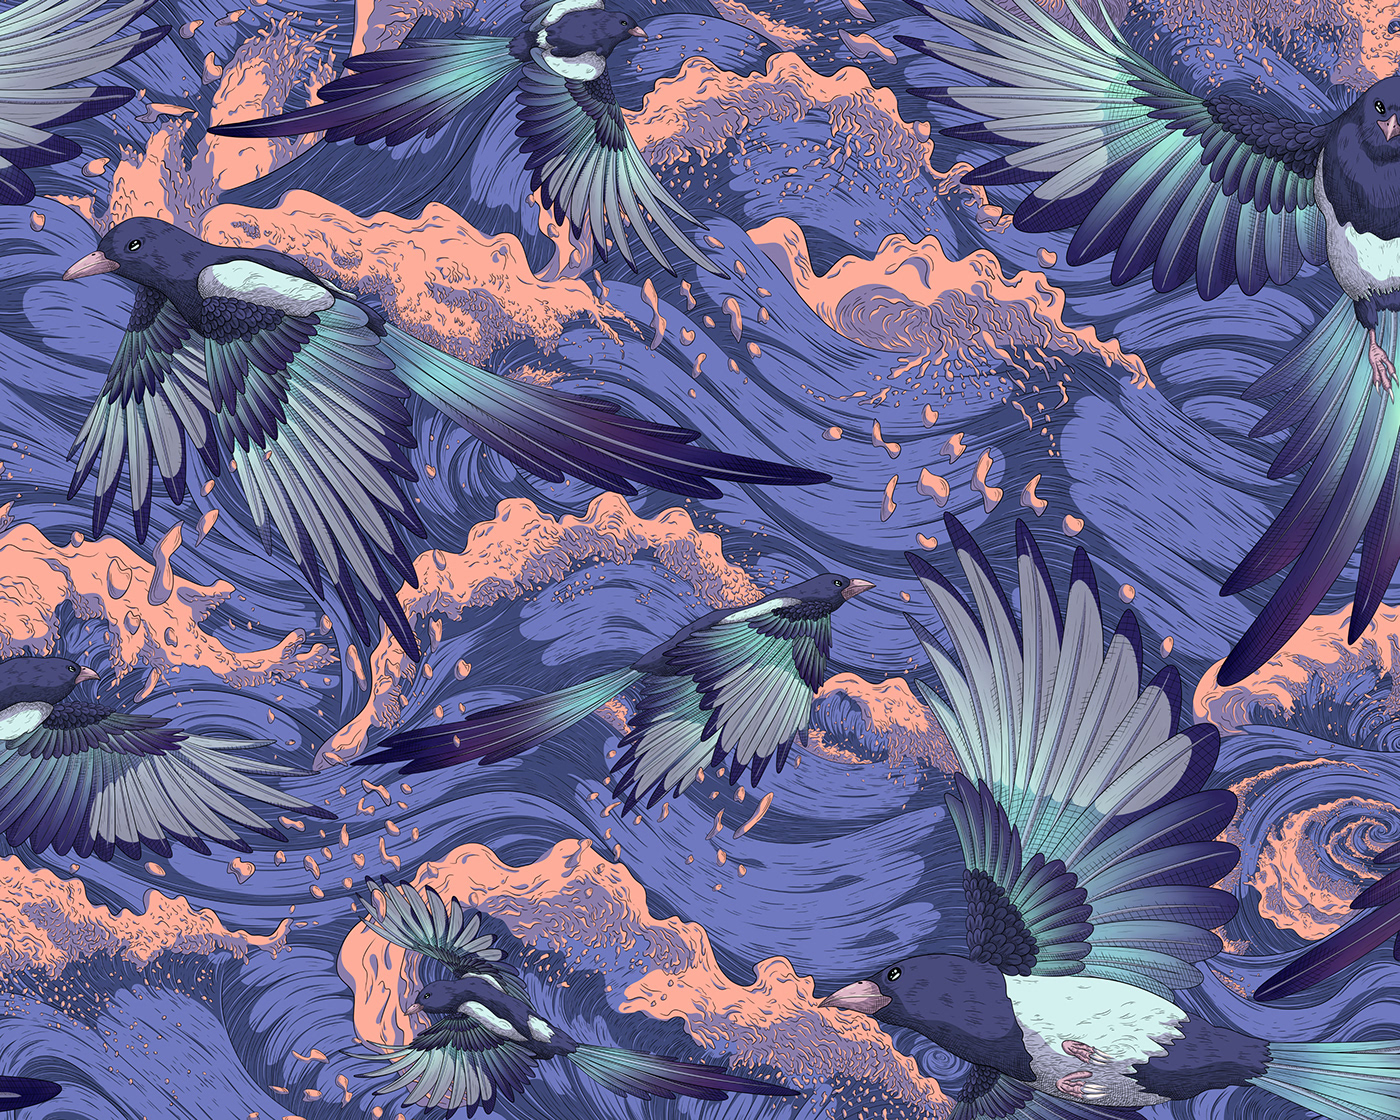 Illustration of a flock of blue magpie flying above a turbulent ocean.